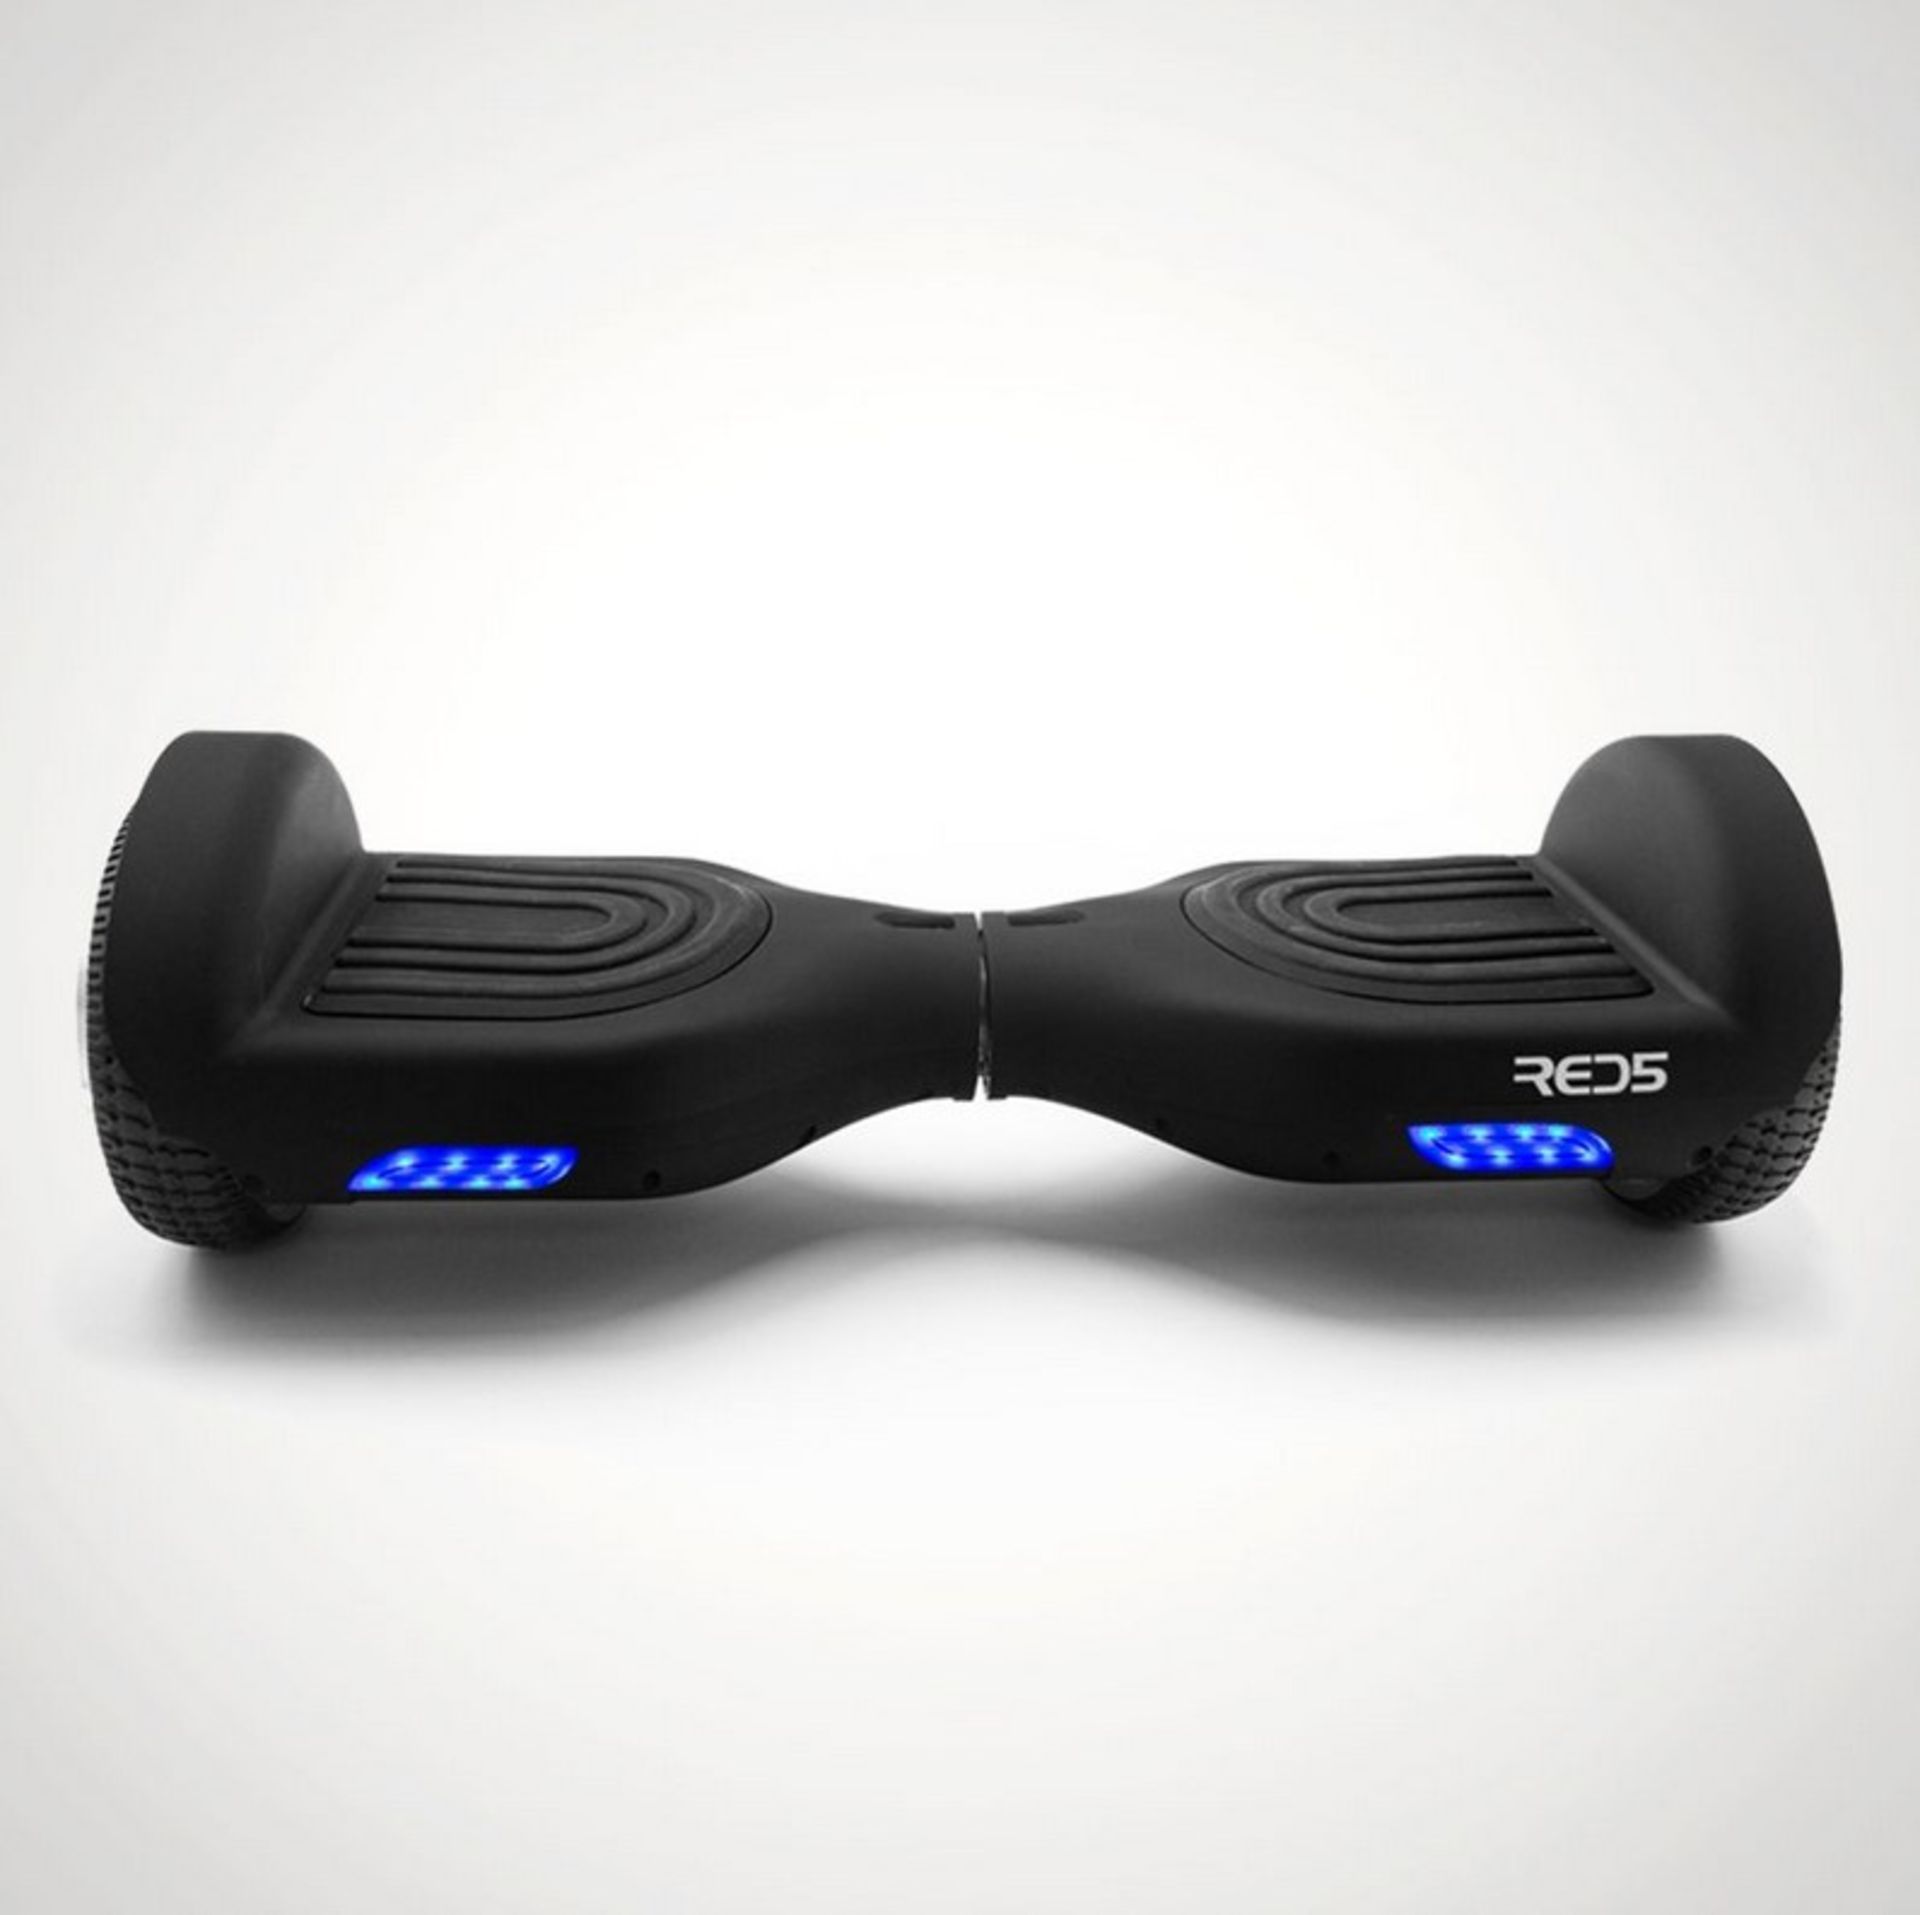 (4/5P) RRP £199. Red5 Hoverboard Pro. Top Speed 9km/h. Range Up To 5.5 Miles. Built In Rechargeab... - Image 2 of 7